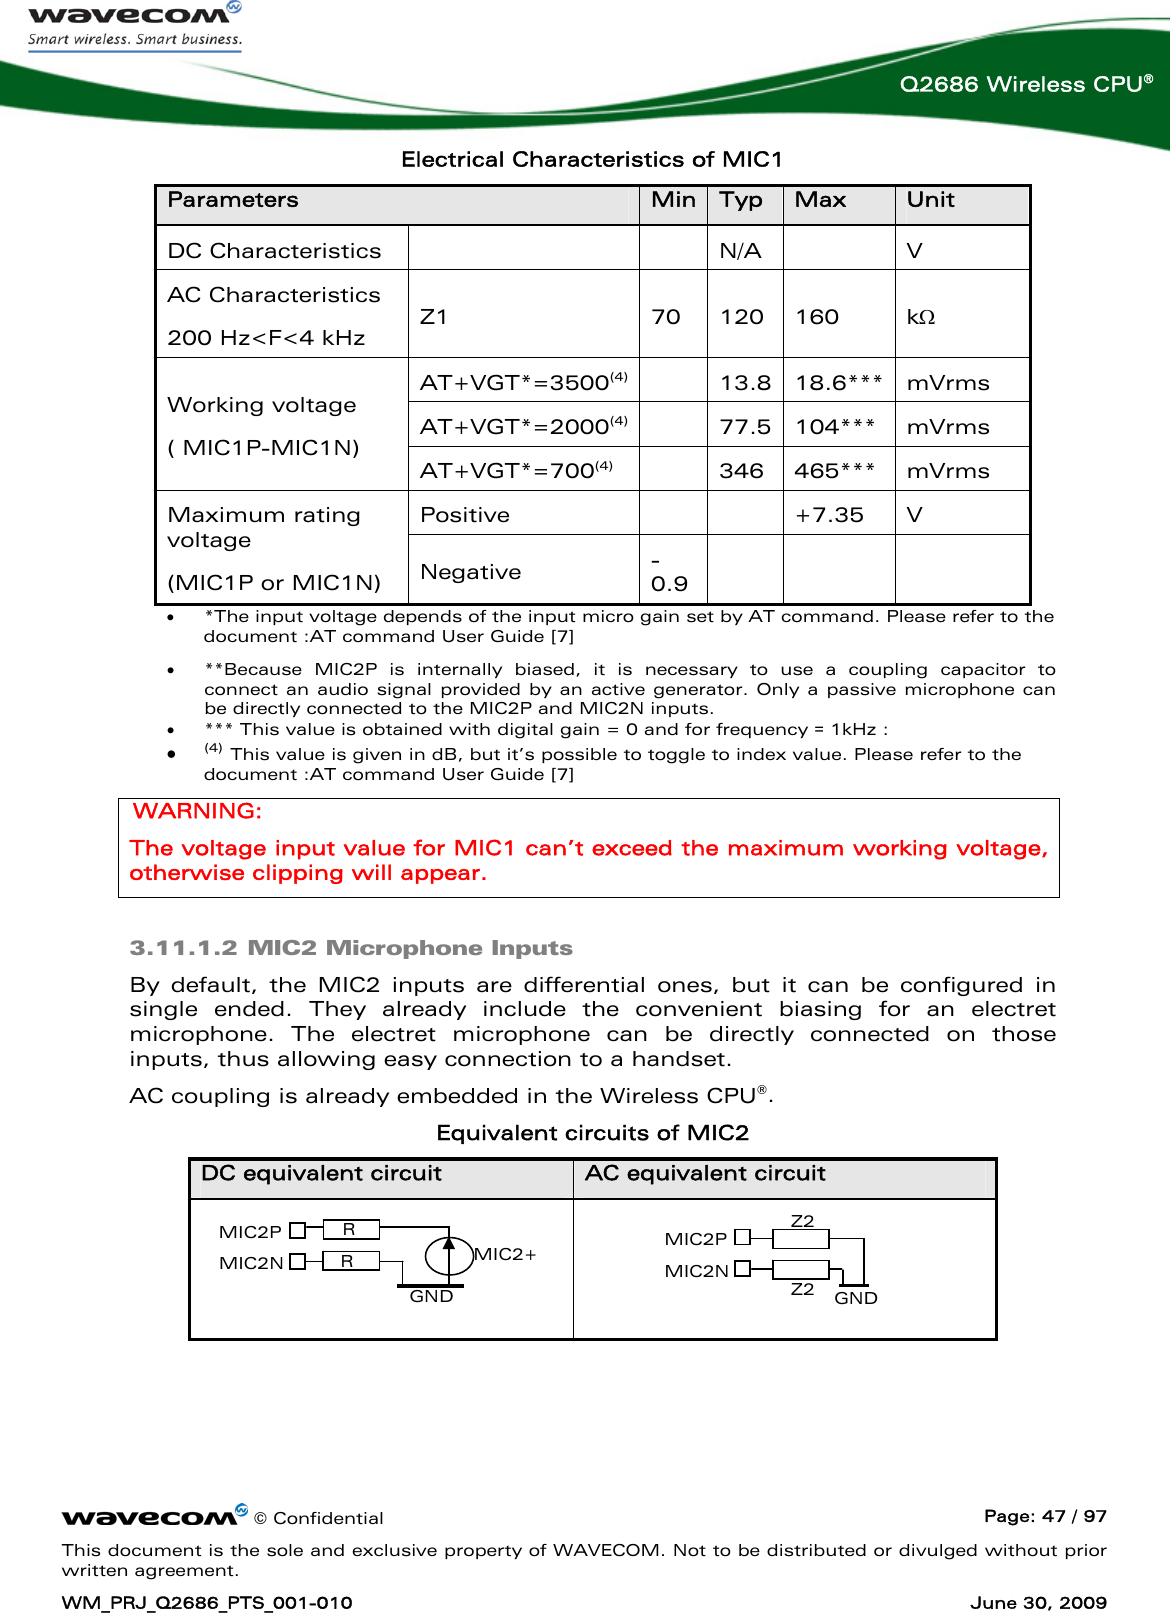      © Confidential  Page: 47 / 97 This document is the sole and exclusive property of WAVECOM. Not to be distributed or divulged without prior written agreement. WM_PRJ_Q2686_PTS_001-010  June 30, 2009  Q2686 Wireless CPU® Electrical Characteristics of MIC1 Parameters  Min Typ  Max  Unit DC Characteristics     N/A   V AC Characteristics 200 Hz&lt;F&lt;4 kHz Z1  70  120  160  kΩ AT+VGT*=3500(4)  13.8 18.6***  mVrms AT+VGT*=2000(4)  77.5 104***  mVrms Working voltage  ( MIC1P-MIC1N) AT+VGT*=700(4)    346  465***  mVrms Positive      +7.35  V Maximum rating voltage (MIC1P or MIC1N) Negative  -0.9       • *The input voltage depends of the input micro gain set by AT command. Please refer to the document :AT command User Guide [7] • **Because MIC2P is internally biased, it is necessary to use a coupling capacitor to connect an audio signal provided by an active generator. Only a passive microphone can be directly connected to the MIC2P and MIC2N inputs. • *** This value is obtained with digital gain = 0 and for frequency = 1kHz :  • (4) This value is given in dB, but it’s possible to toggle to index value. Please refer to the document :AT command User Guide [7] WARNING: The voltage input value for MIC1 can’t exceed the maximum working voltage, otherwise clipping will appear. 3.11.1.2 MIC2 Microphone Inputs By default, the MIC2 inputs are differential ones, but it can be configured in single ended. They already include the convenient biasing for an electret microphone. The electret microphone can be directly connected on those inputs, thus allowing easy connection to a handset. AC coupling is already embedded in the Wireless CPU®. Equivalent circuits of MIC2 DC equivalent circuit  AC equivalent circuit    MIC2P MIC2N Z2 Z2  GND MIC2+ MIC2P MIC2N RRGND 